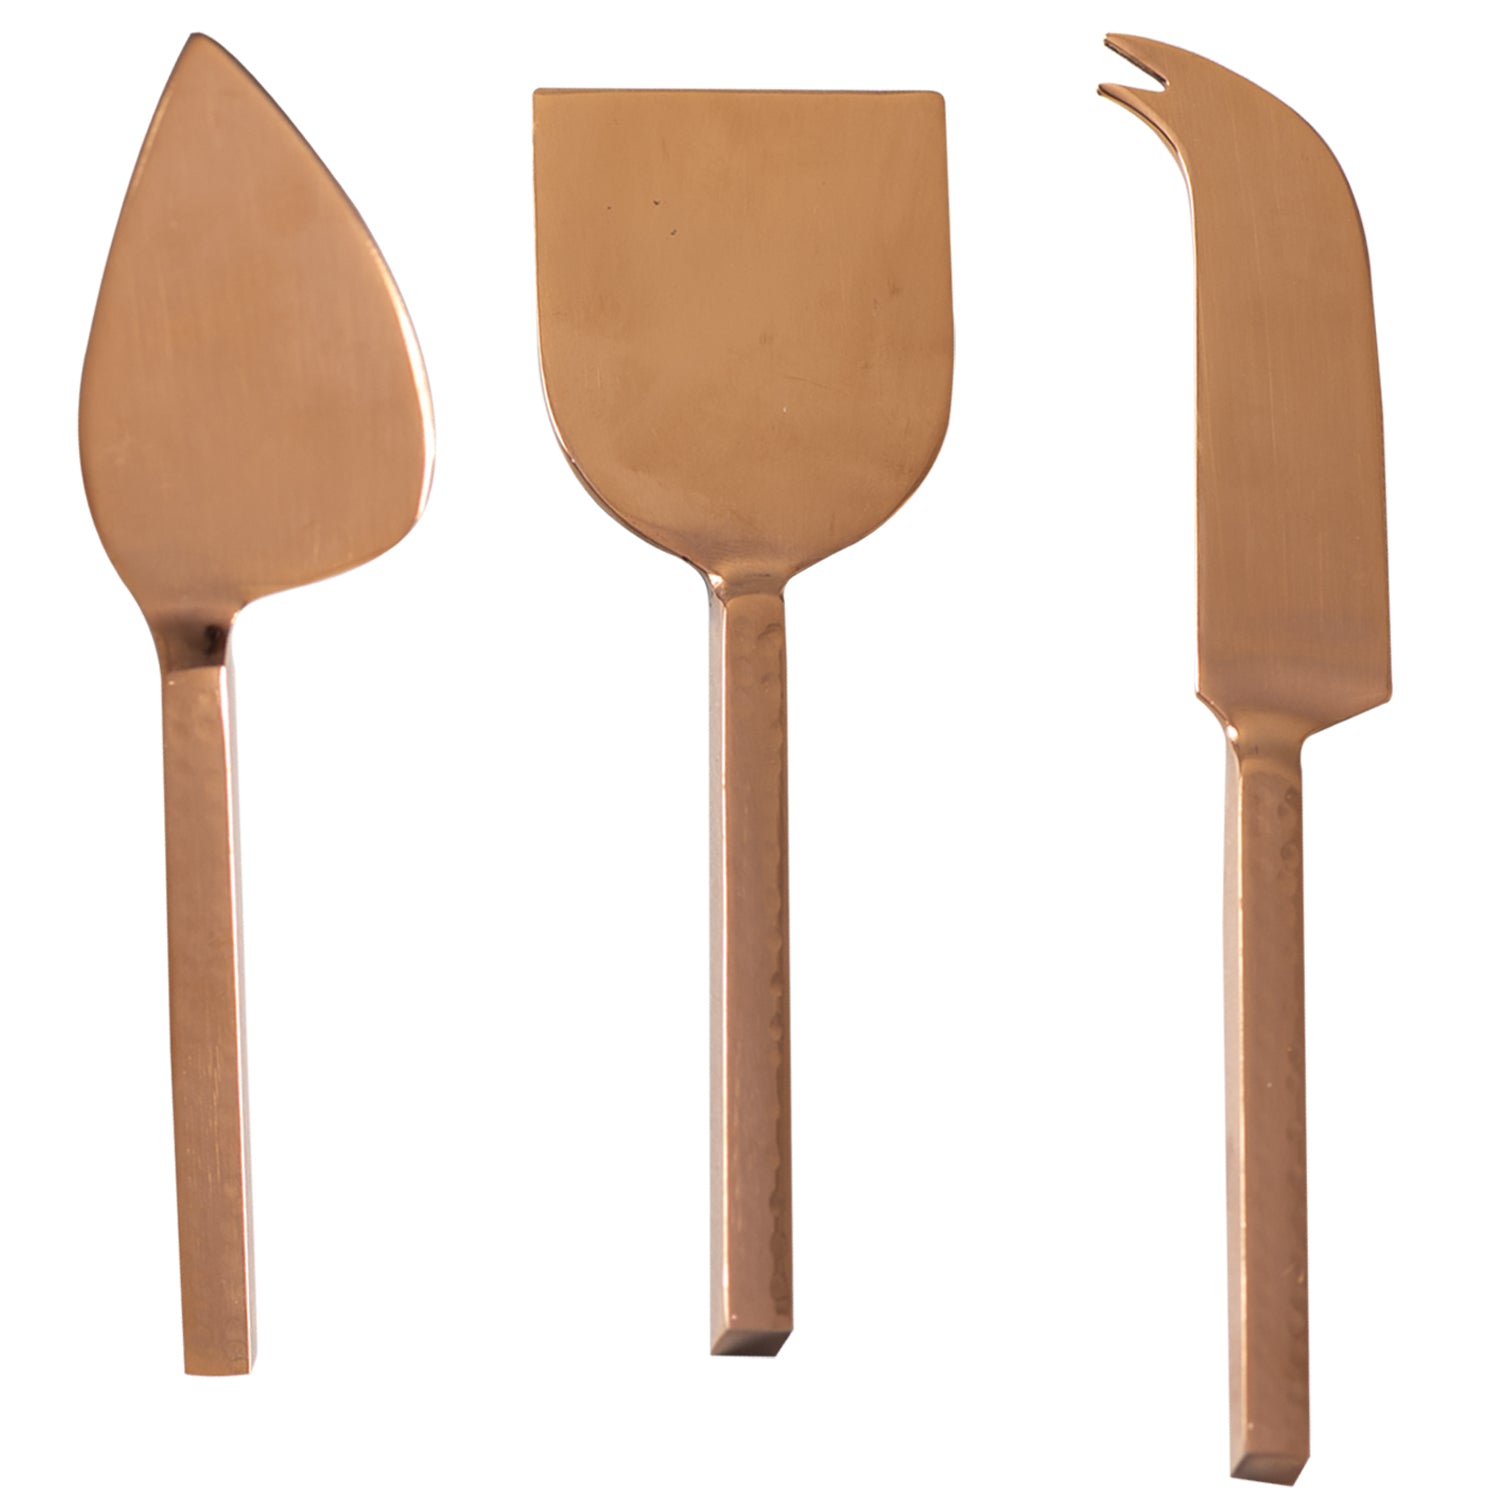 cheese copper knives